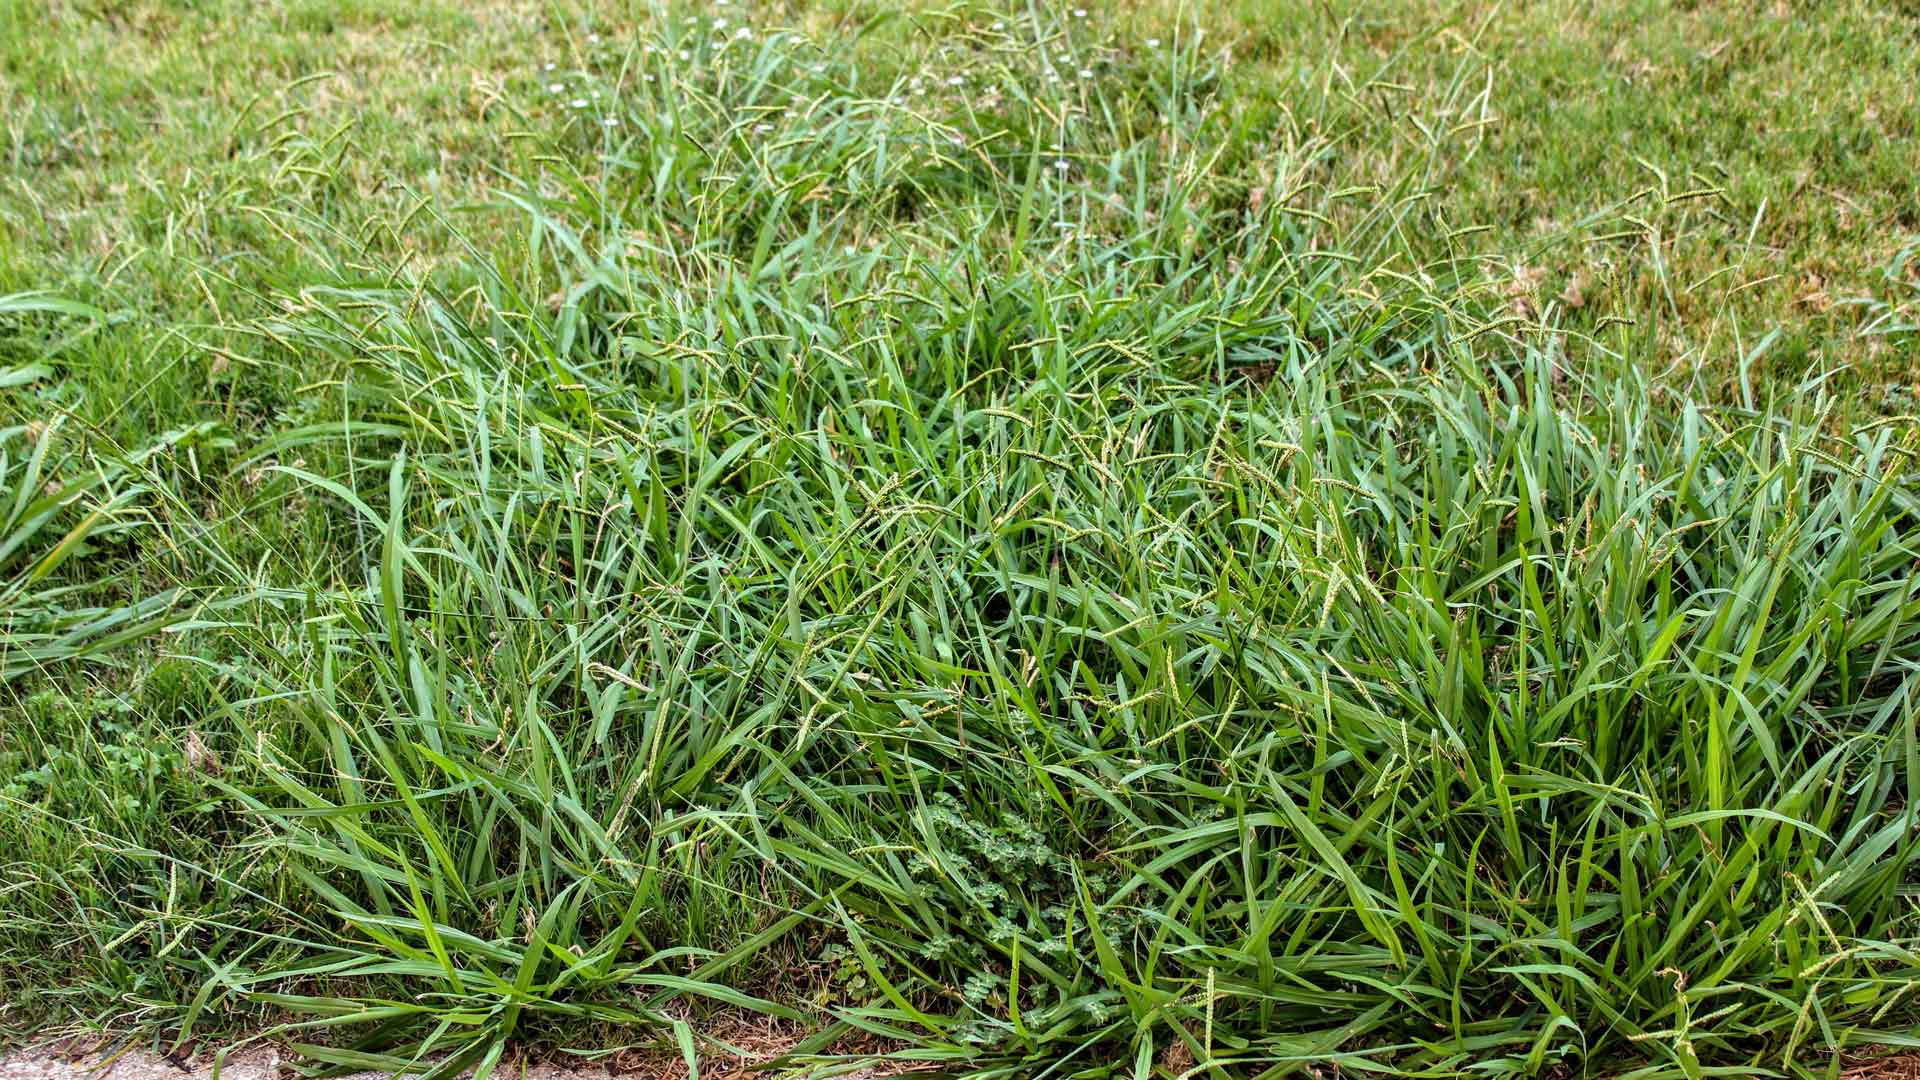 Be on the Lookout for These 4 Weeds That Commonly Invade Lawns in Tennessee